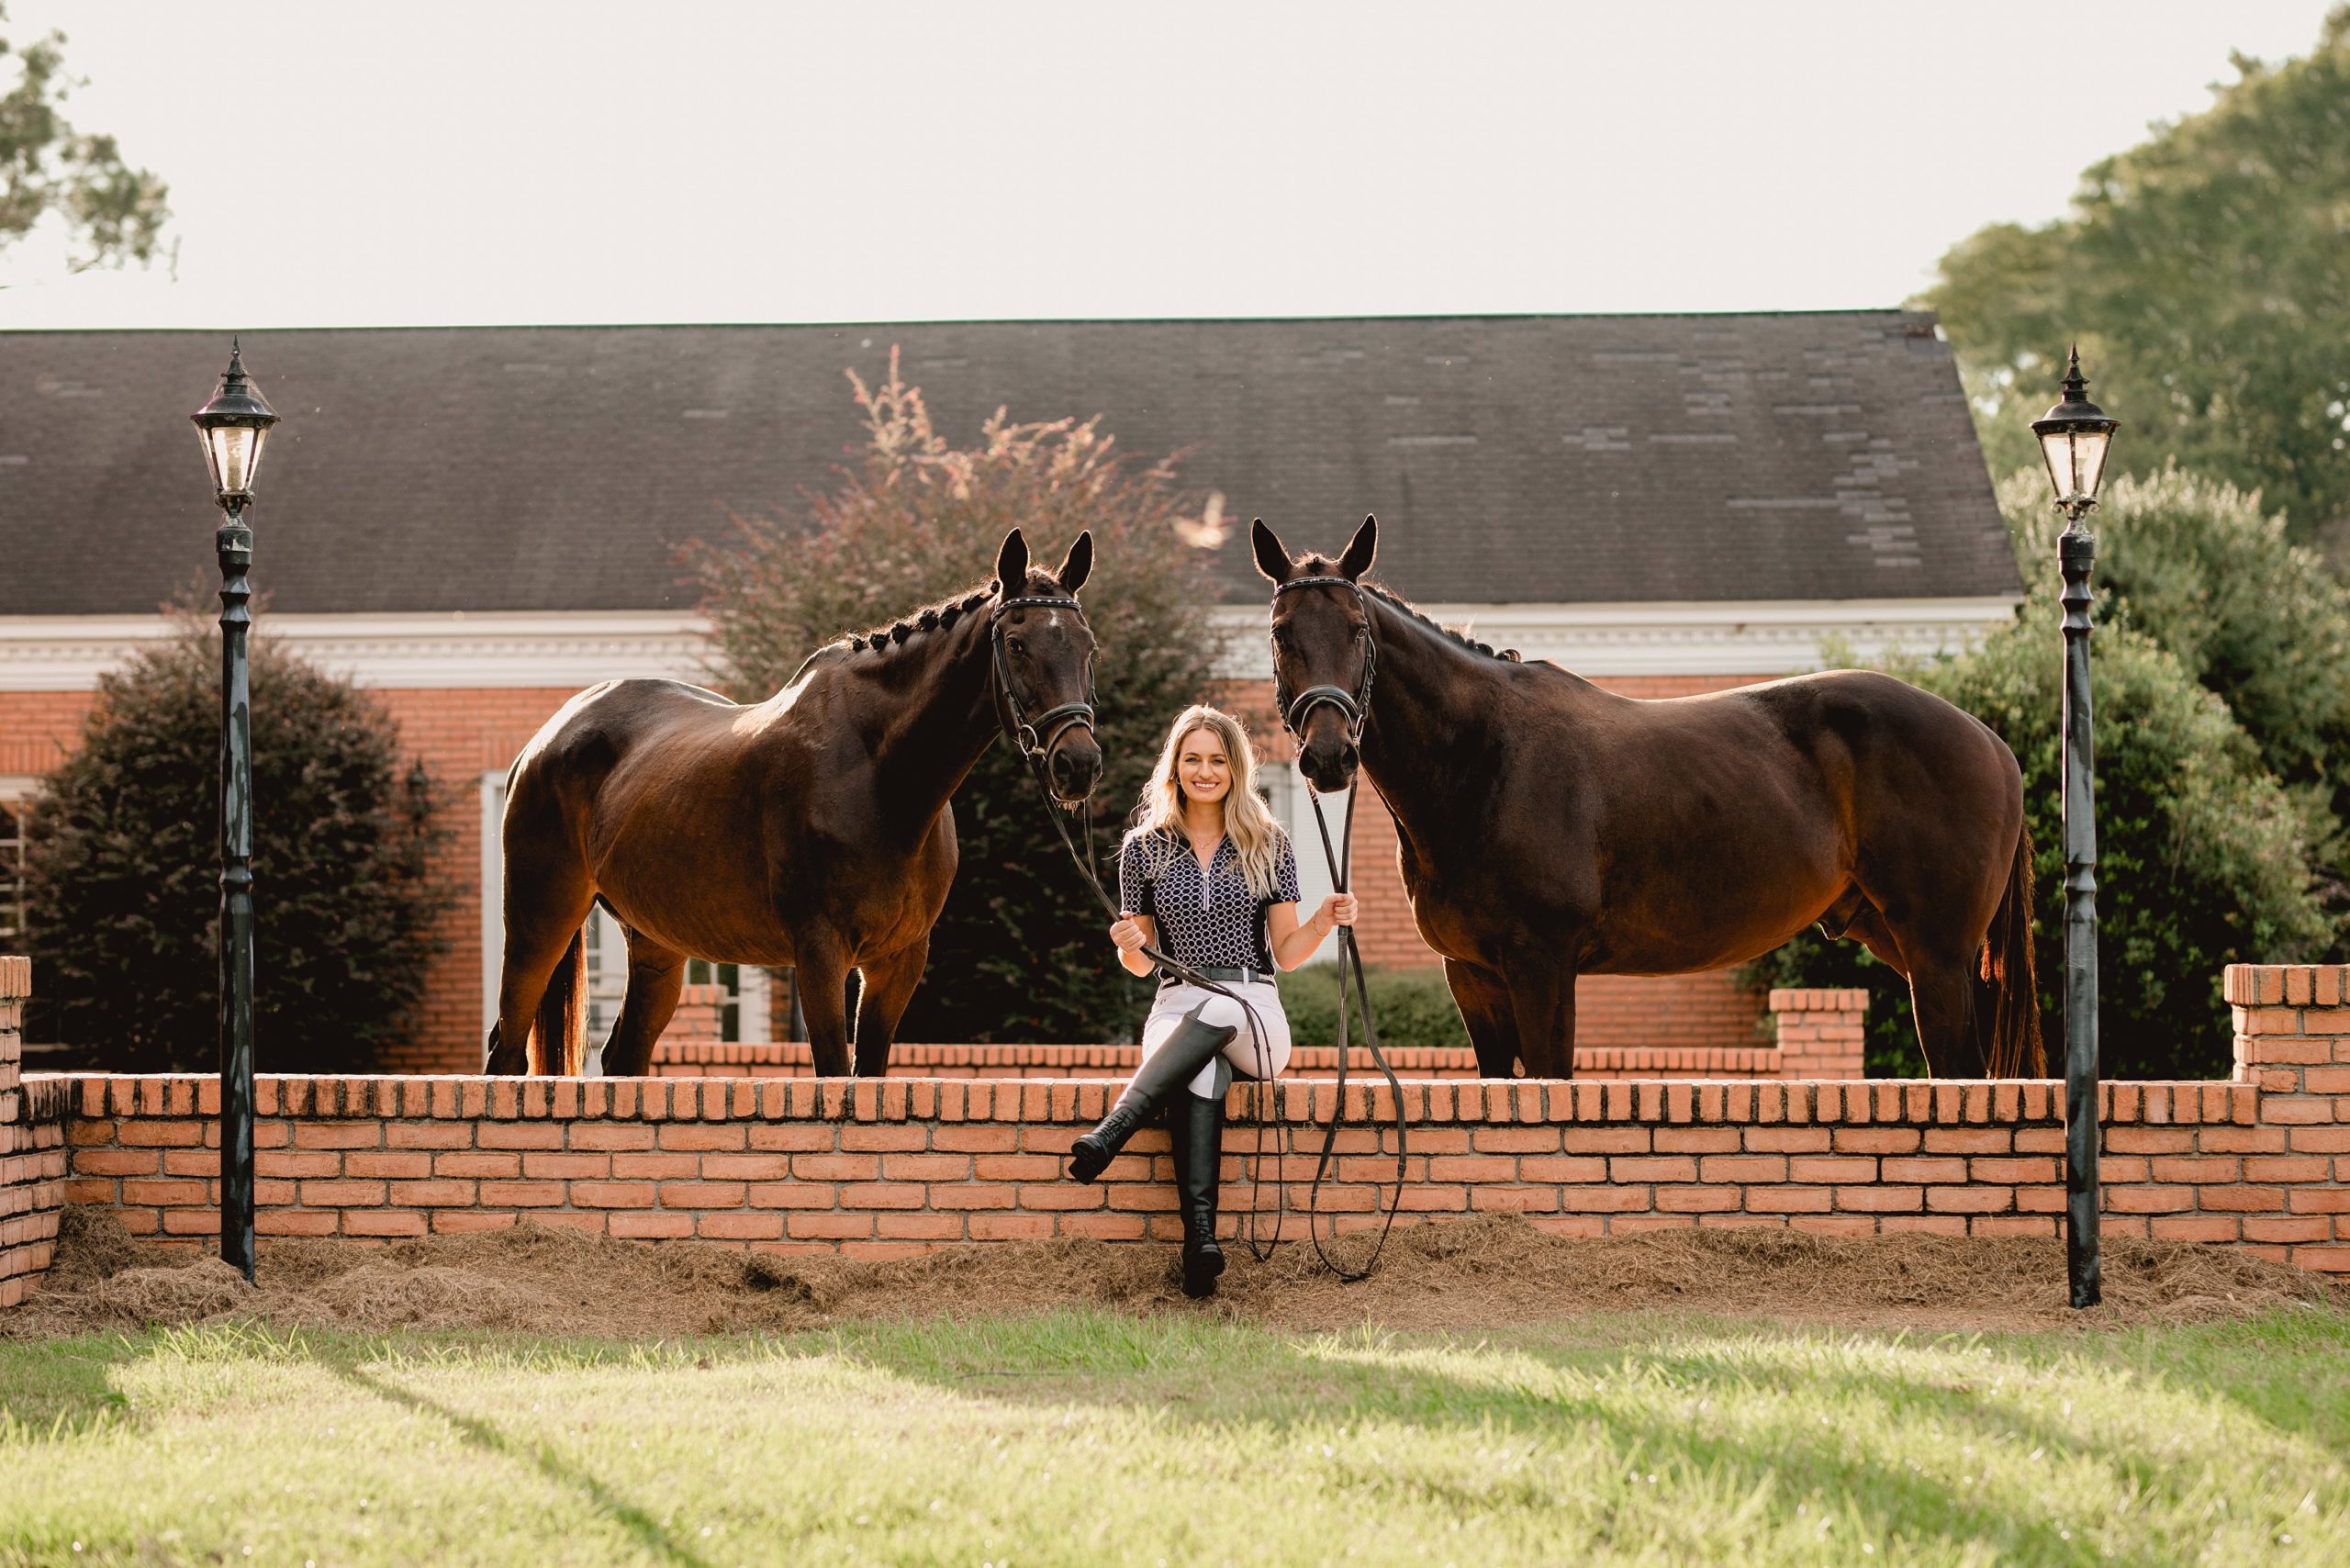 Northwest Florida horse photographer and girl with two horses infront of brick home.